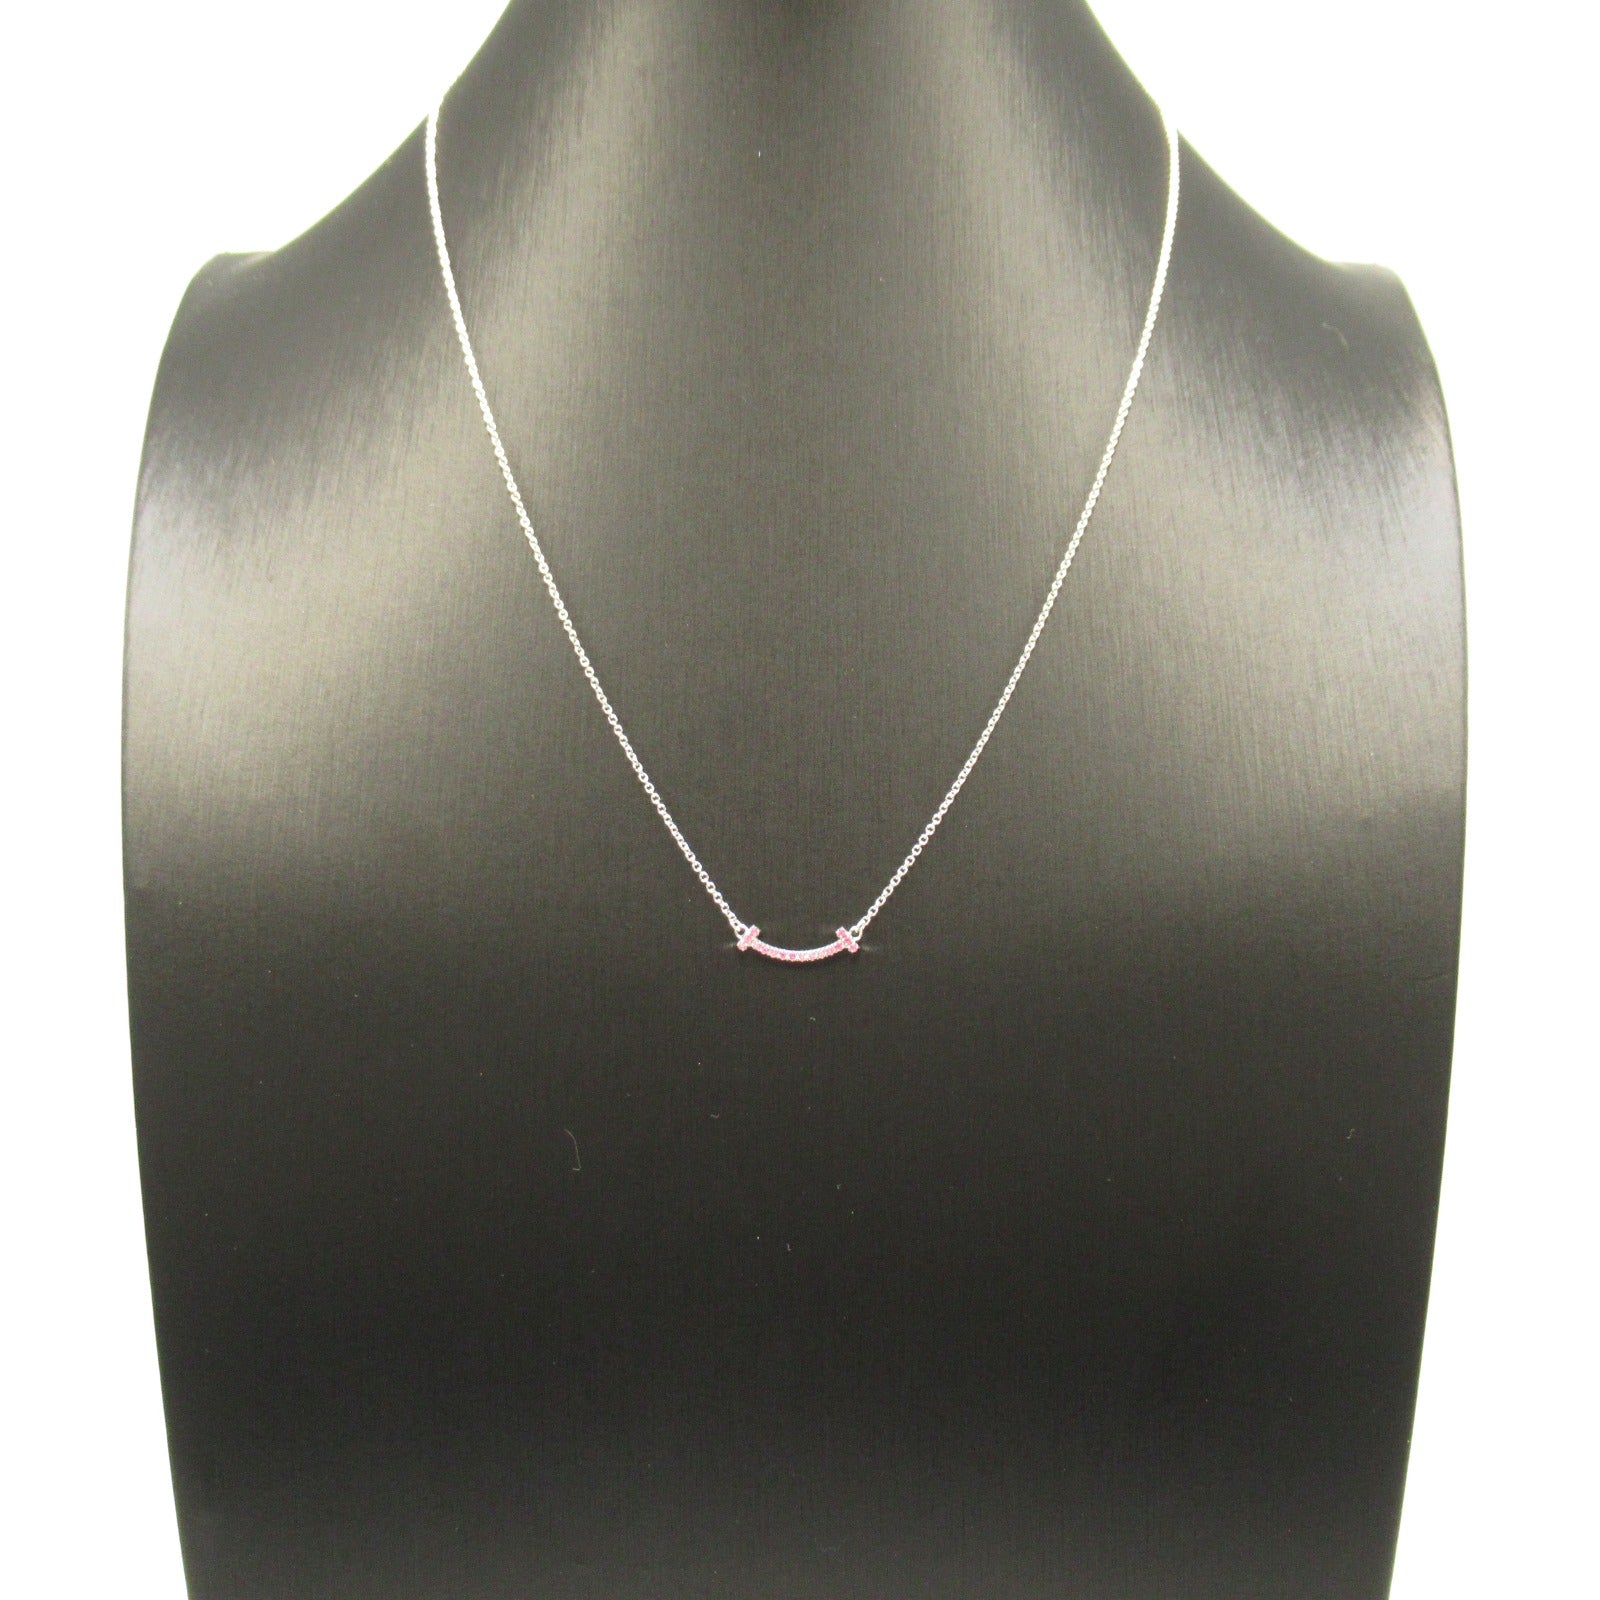 Tiffany TIFFANY&amp;CO T Smile Mini pink sapphire necklace necklace jewelry K18WG (white g) pink sapphire ladies pink